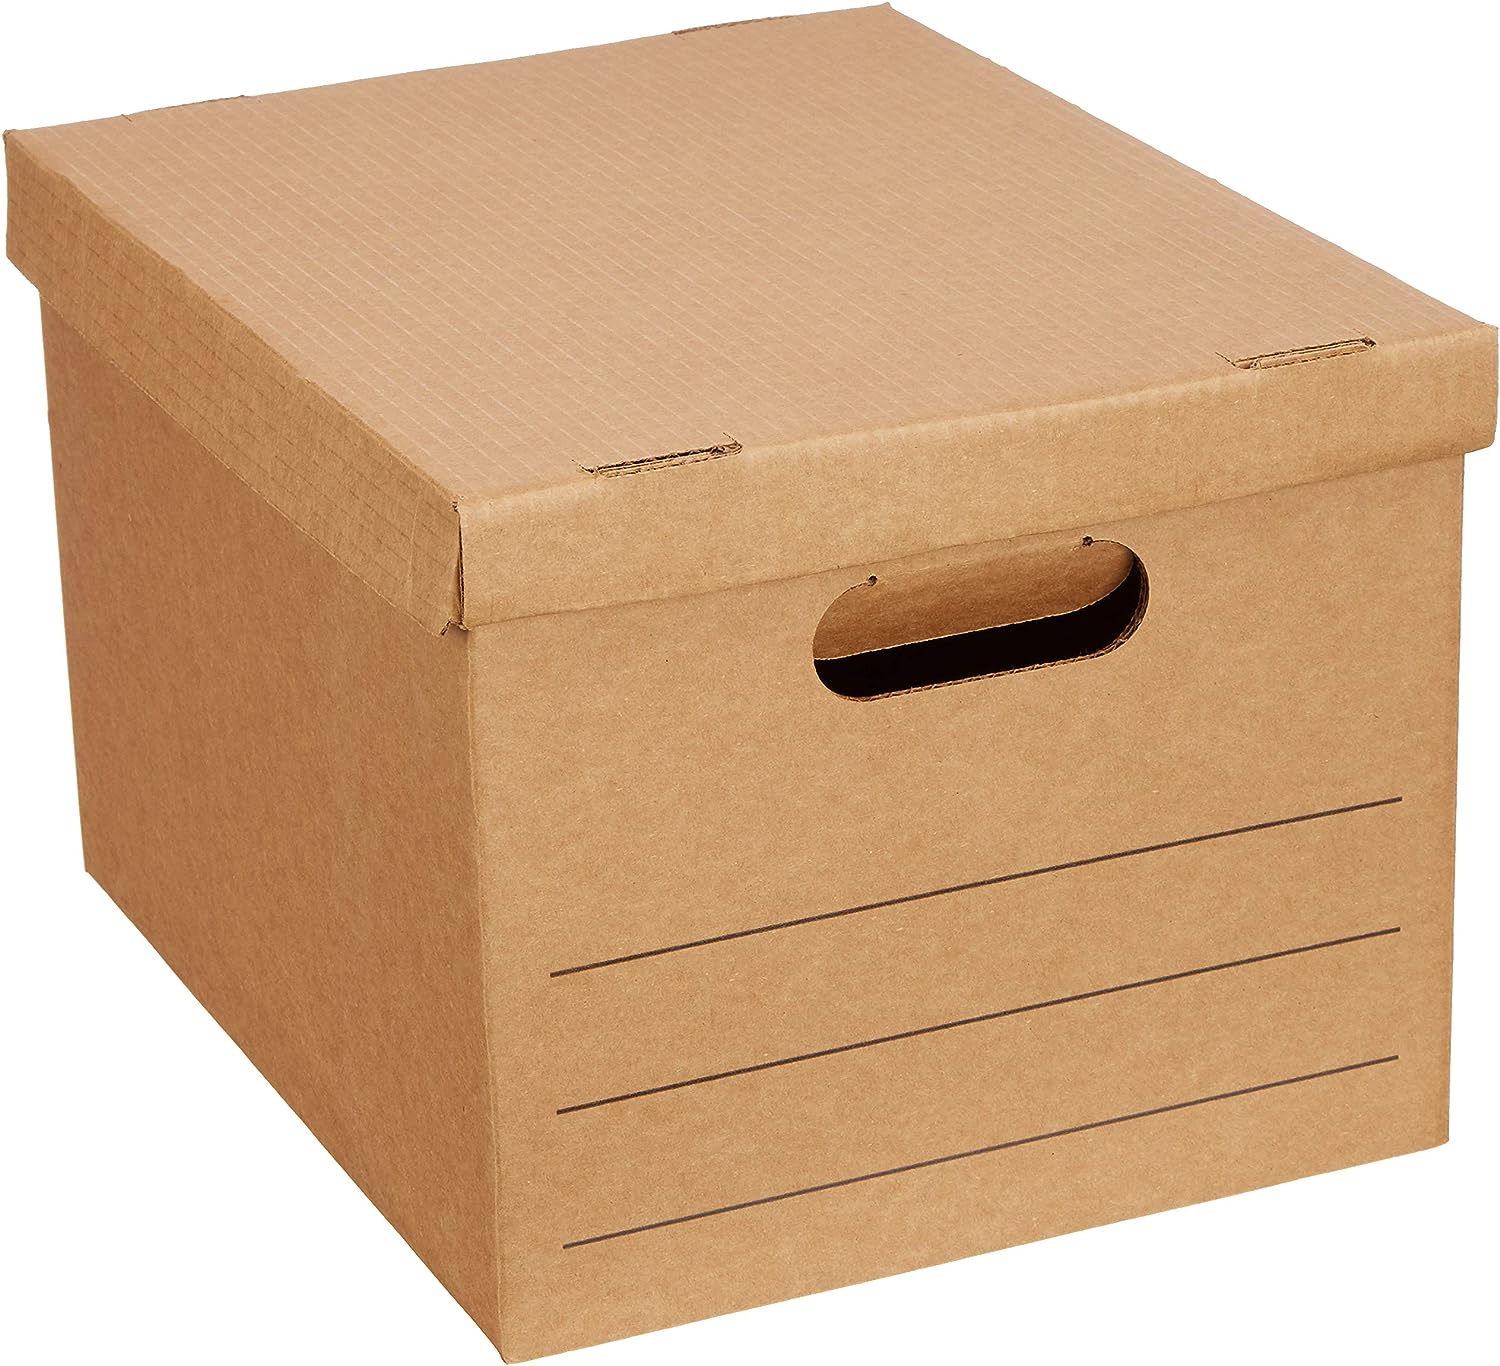 Amazon Basics Small Moving Boxes with Lid and Handles, [...]